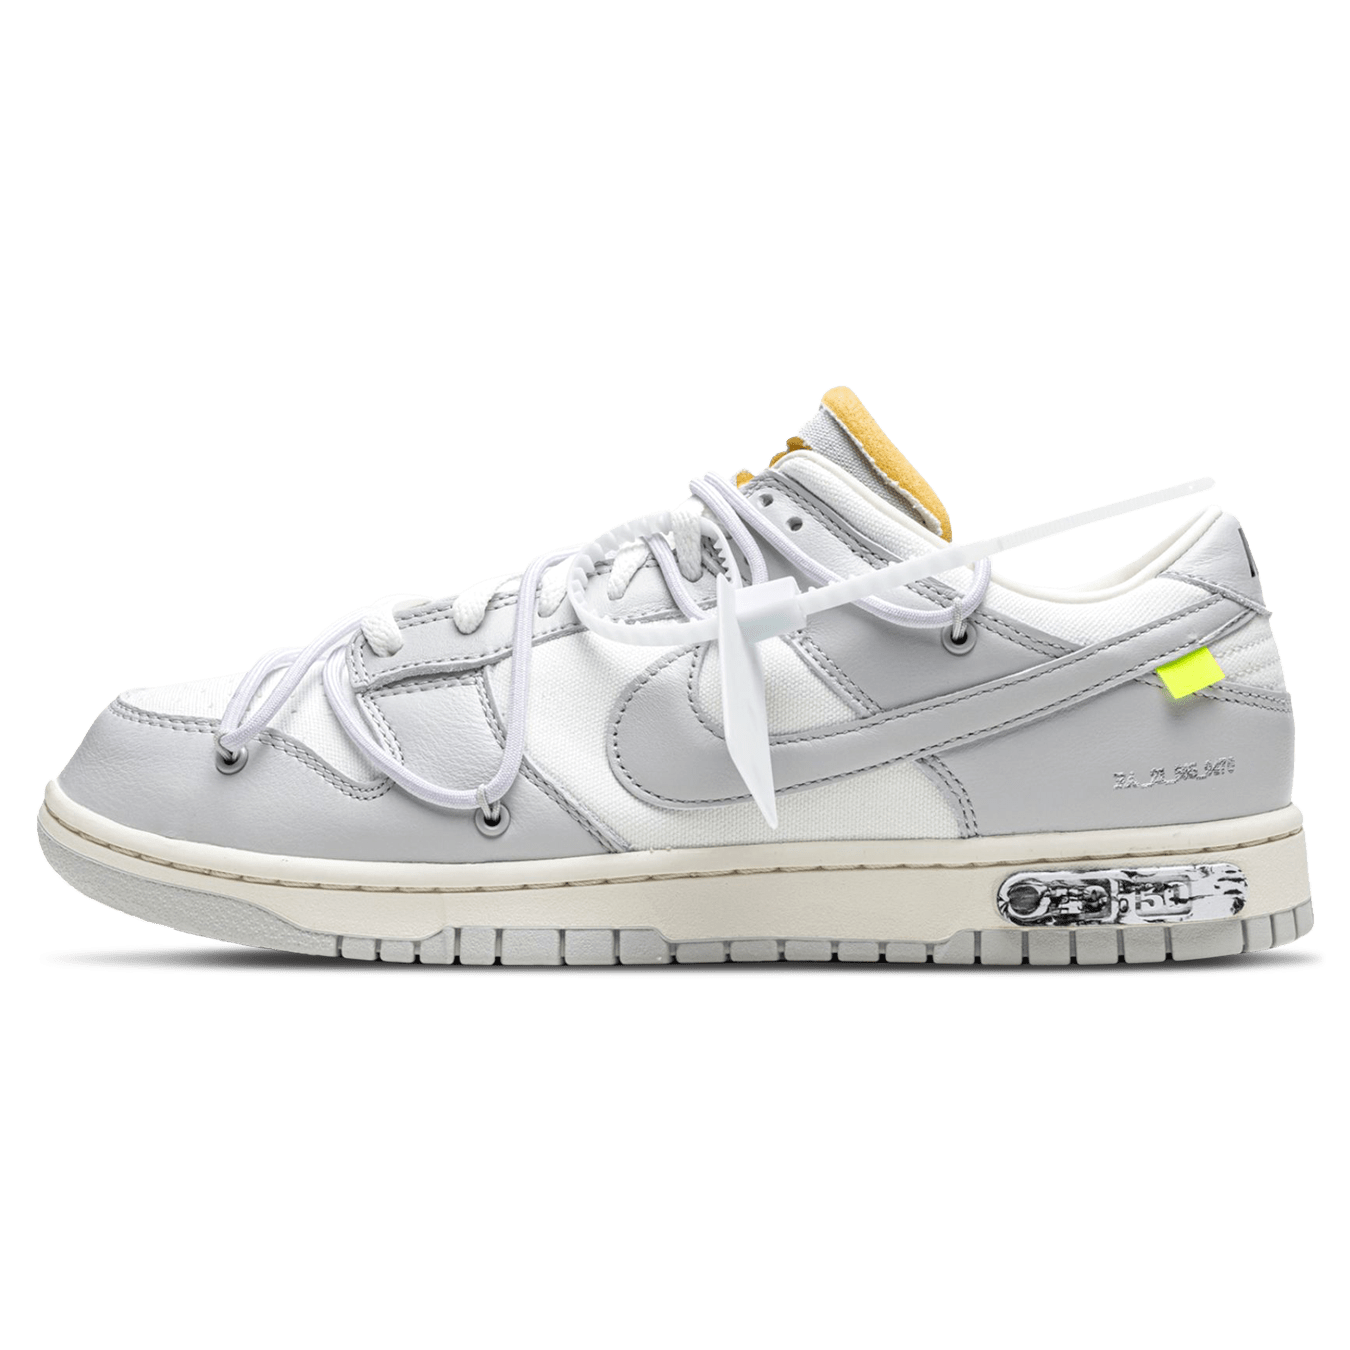 Off White x Nike Dunk Low Lot 49 of 50 DM1602 123